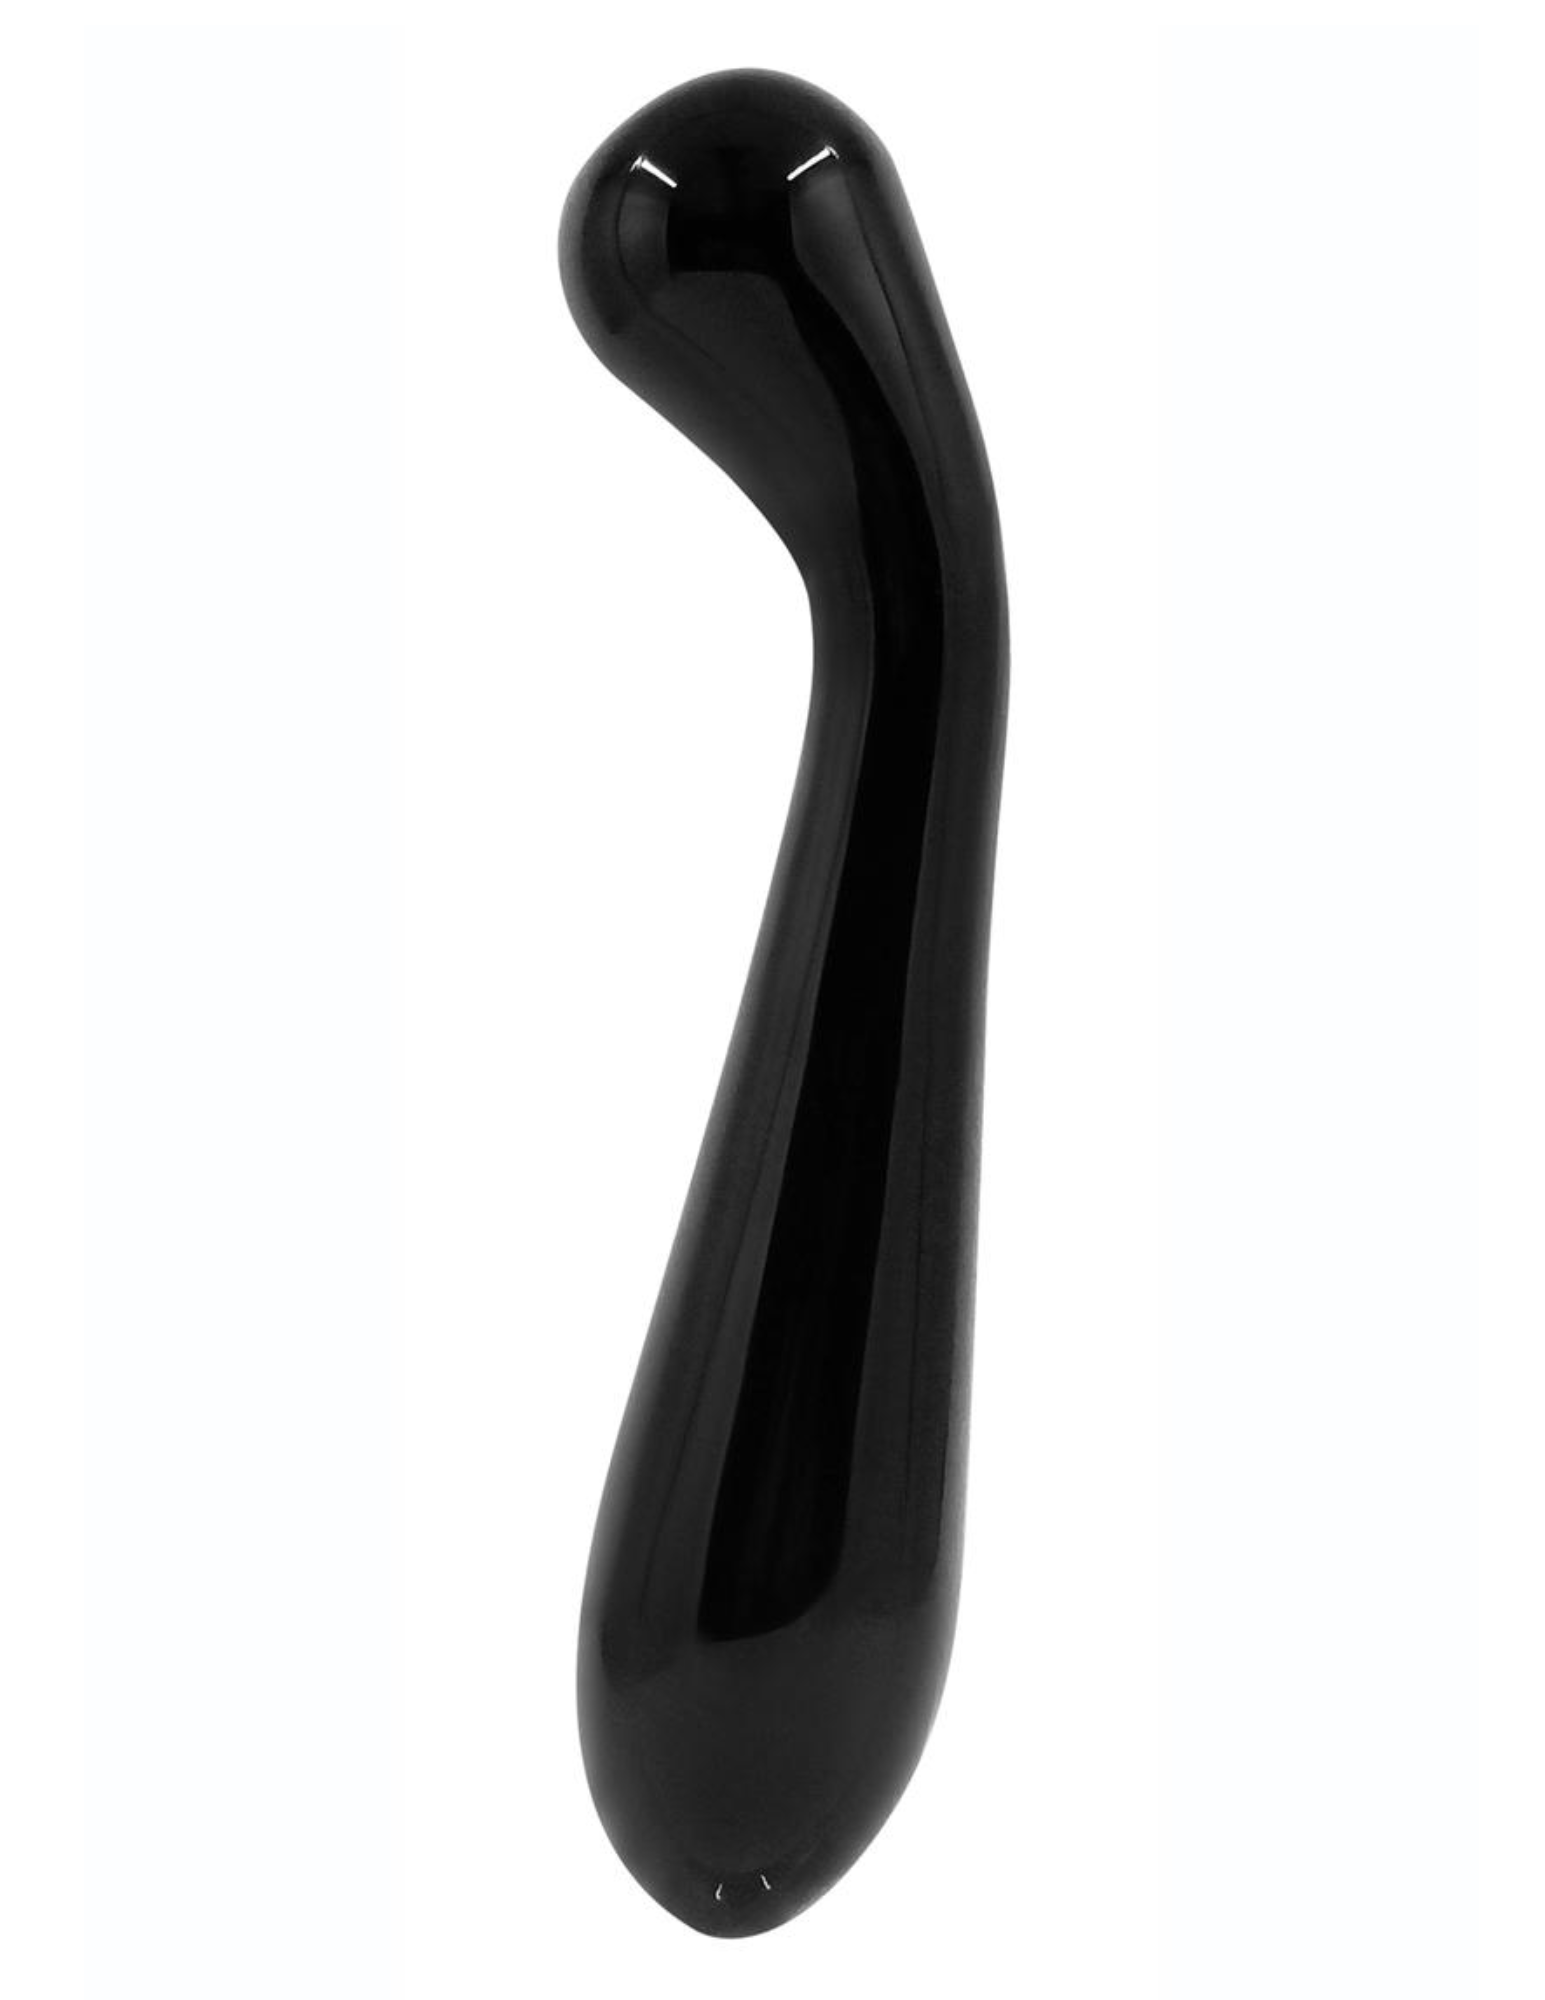 Close-up profile image of the Crystal Premium Glass G-Spot Wand from NS Novelties (charcoal) shows its curved head for maximum stimulation.